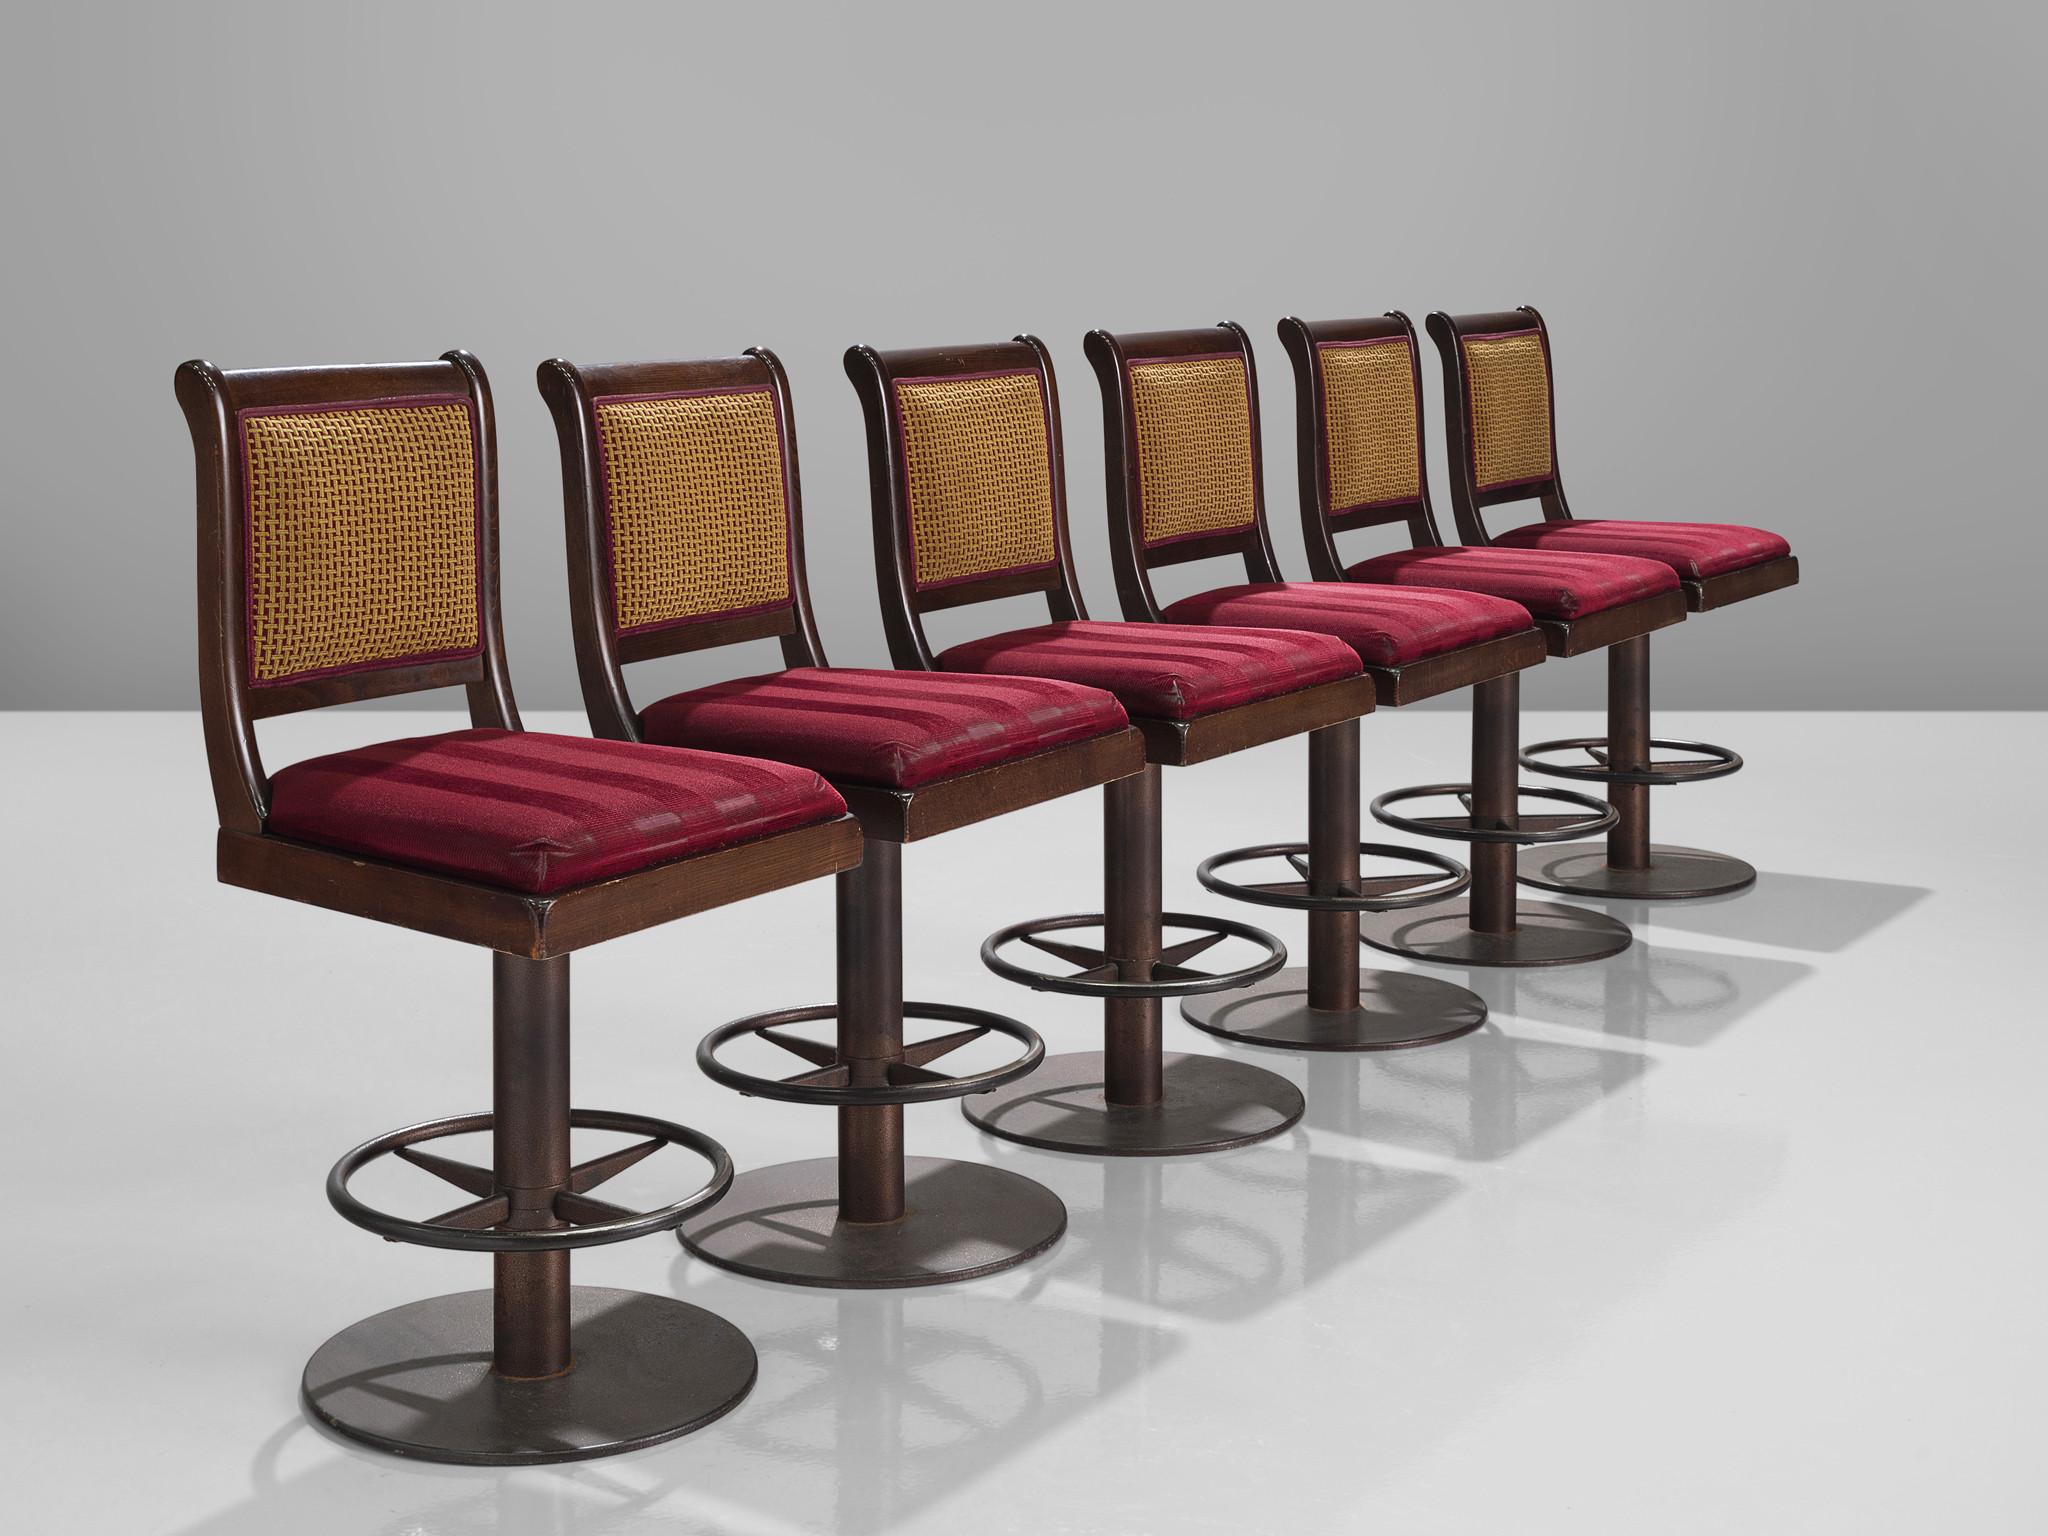 Swivel bar stools, fabric, metal, stained beech, Europe, 1990s

These solid bar stools exude a subtle elegance while delivering an ergonomic seating experience. Their substantial seat and backrest, coupled with a round footrest, ensure comfort. For